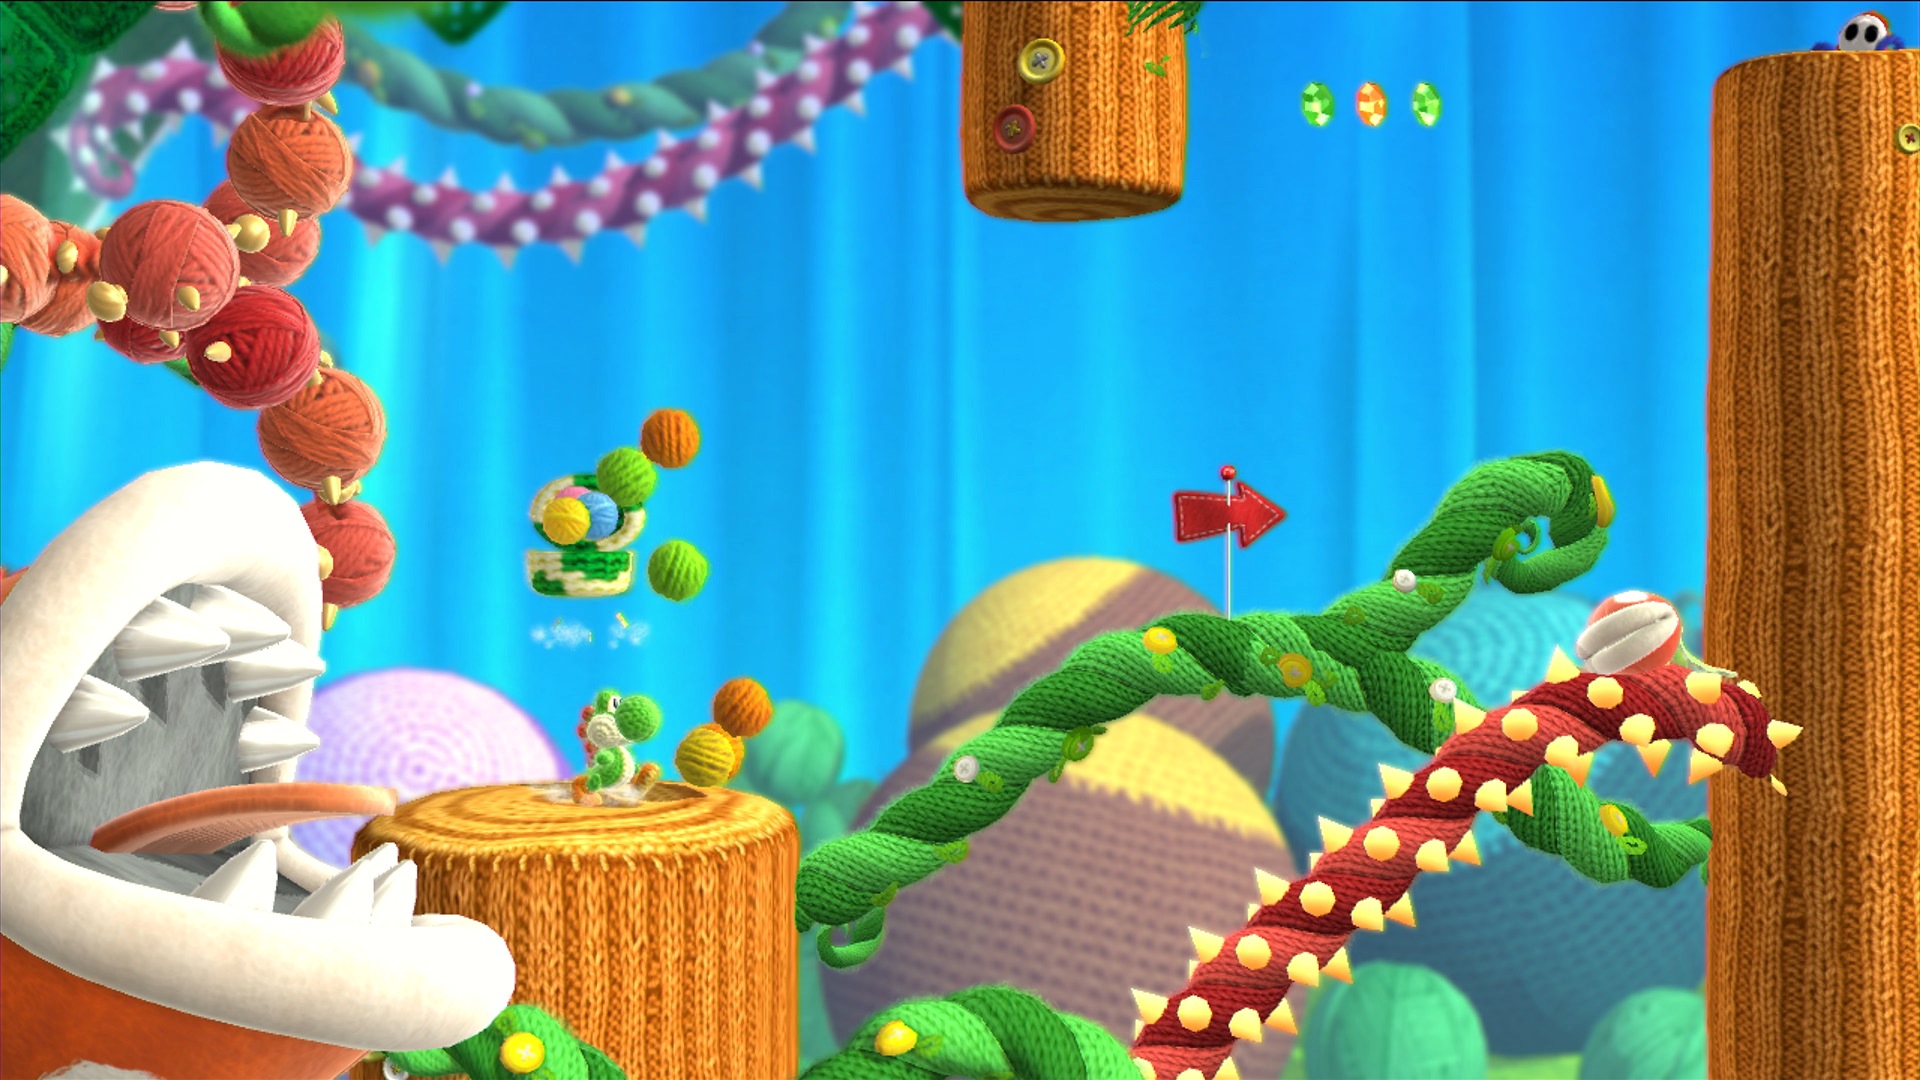 Yoshi's Woolly World Pics, Video Game Collection